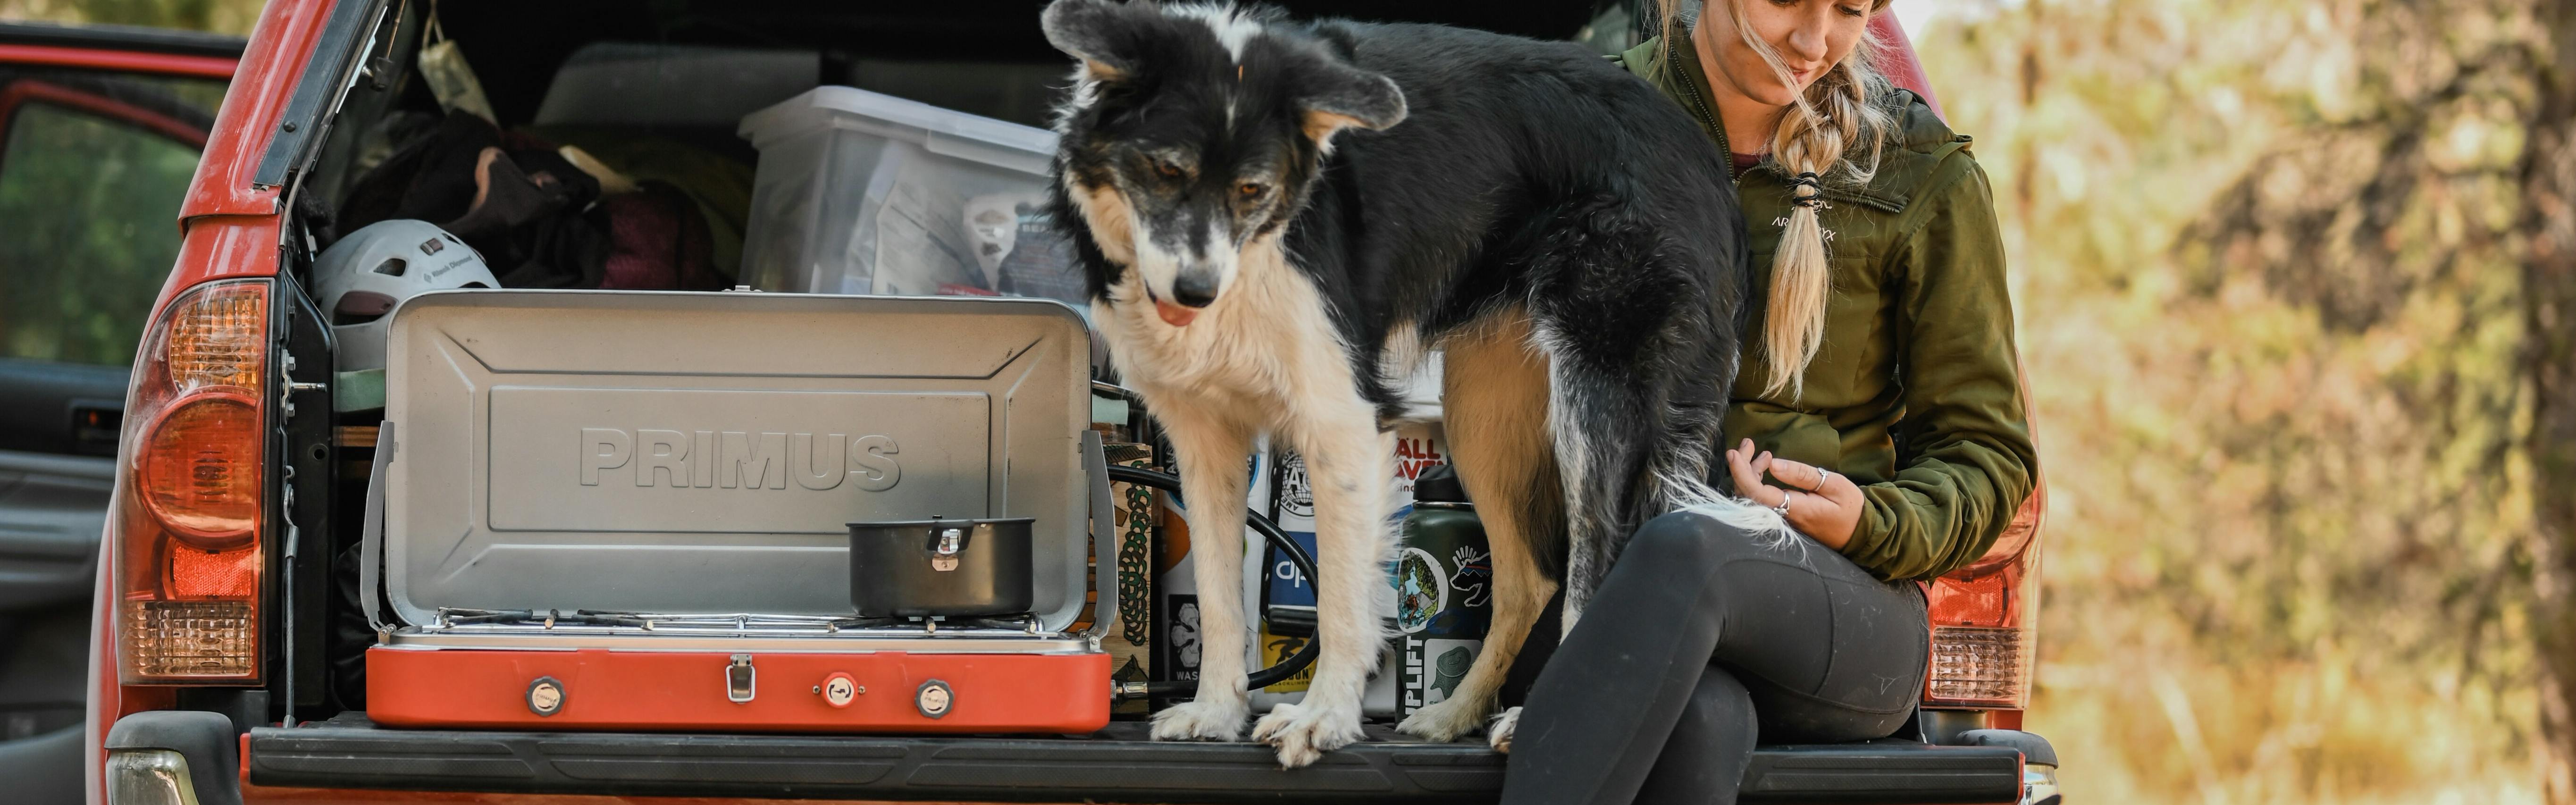 A woman and a dog sitting on the tailgate of a car. There is camping gear visible in the car and a camping stove on the tailgate. 